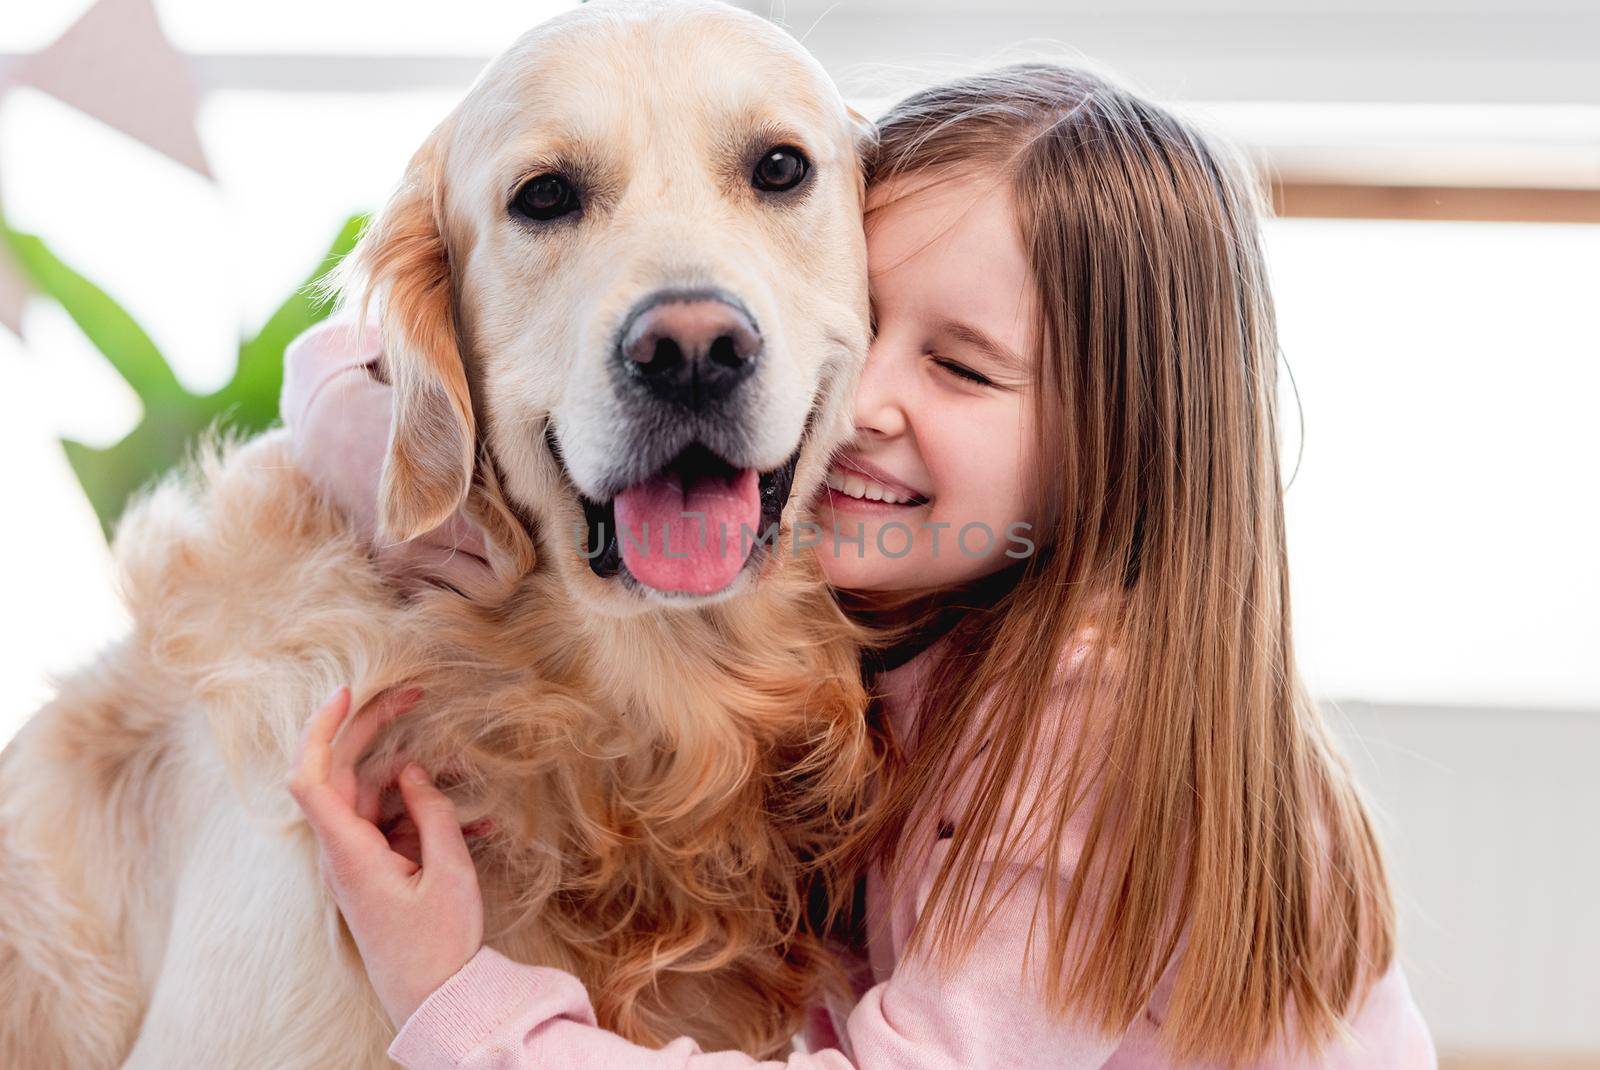 Little beautiful girl petting adorable golden retriever dog. Closeup portrait of child and doggy